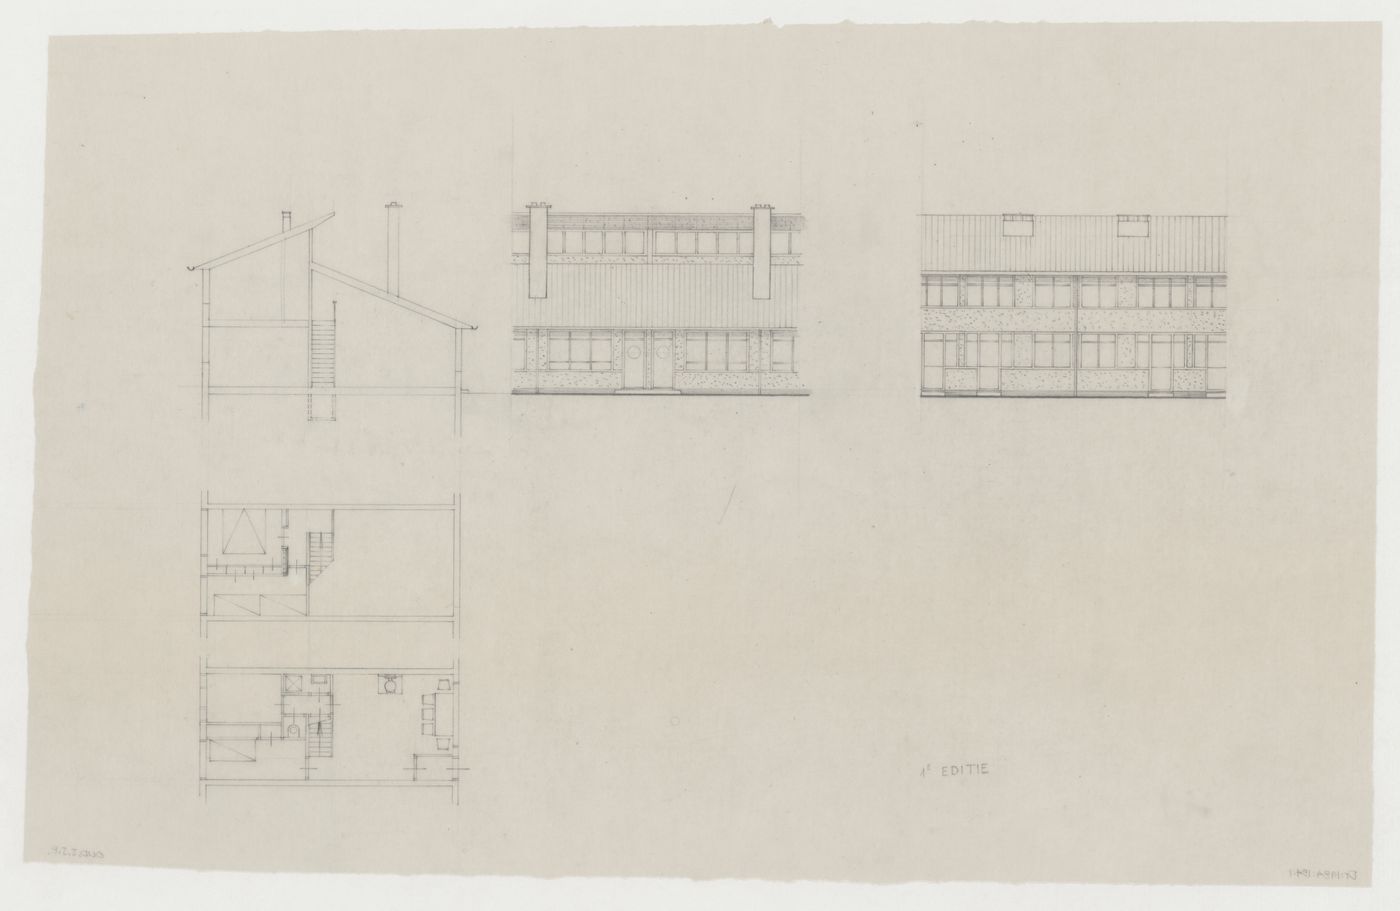 Plans, elevations, and section for a house/studio, Hillegersberg, Netherlands